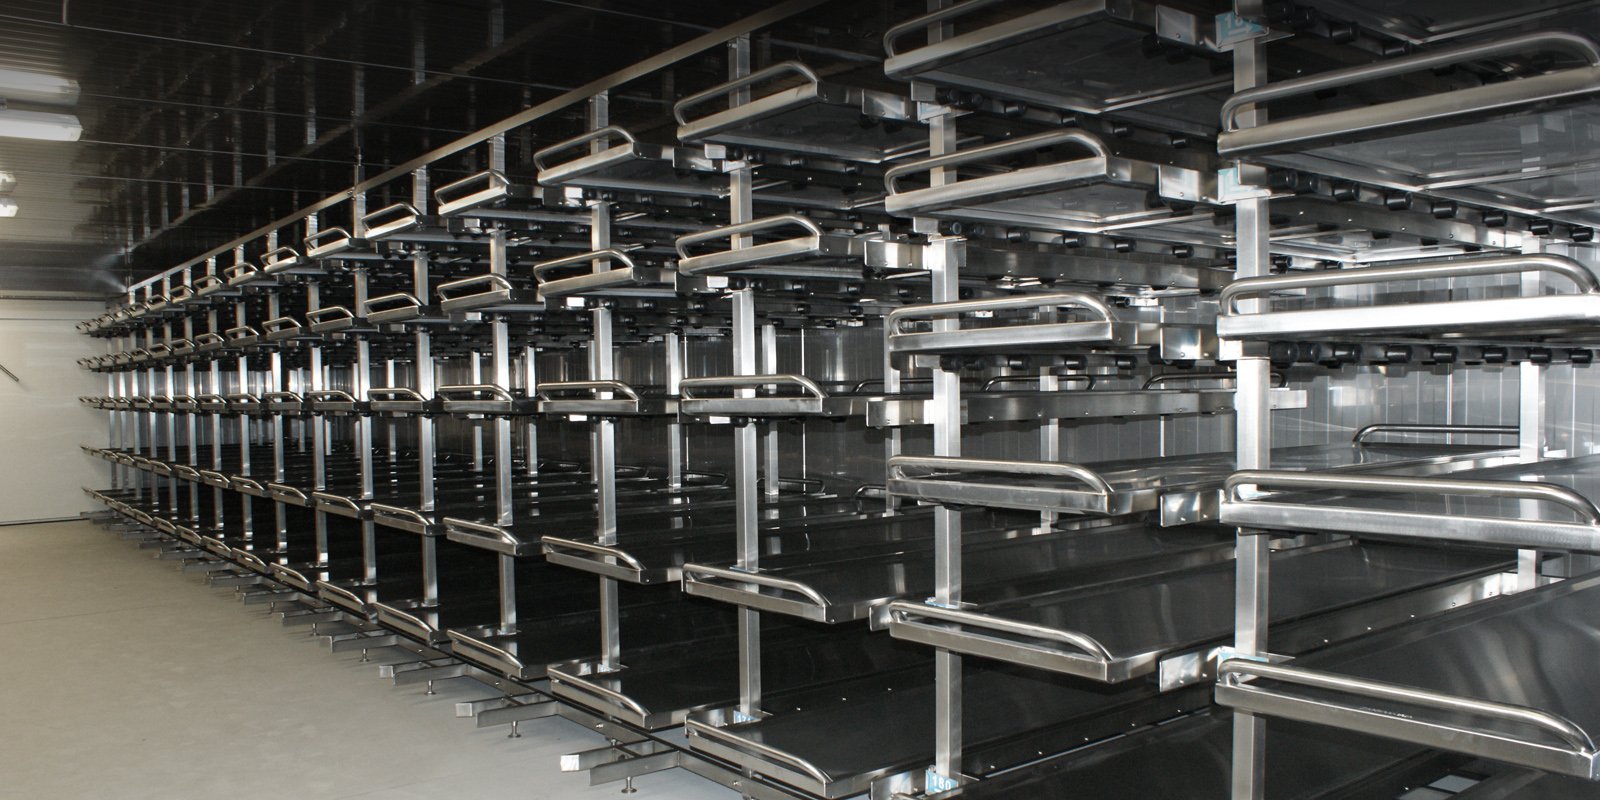 Refrigeration and freezing chambers in racks system